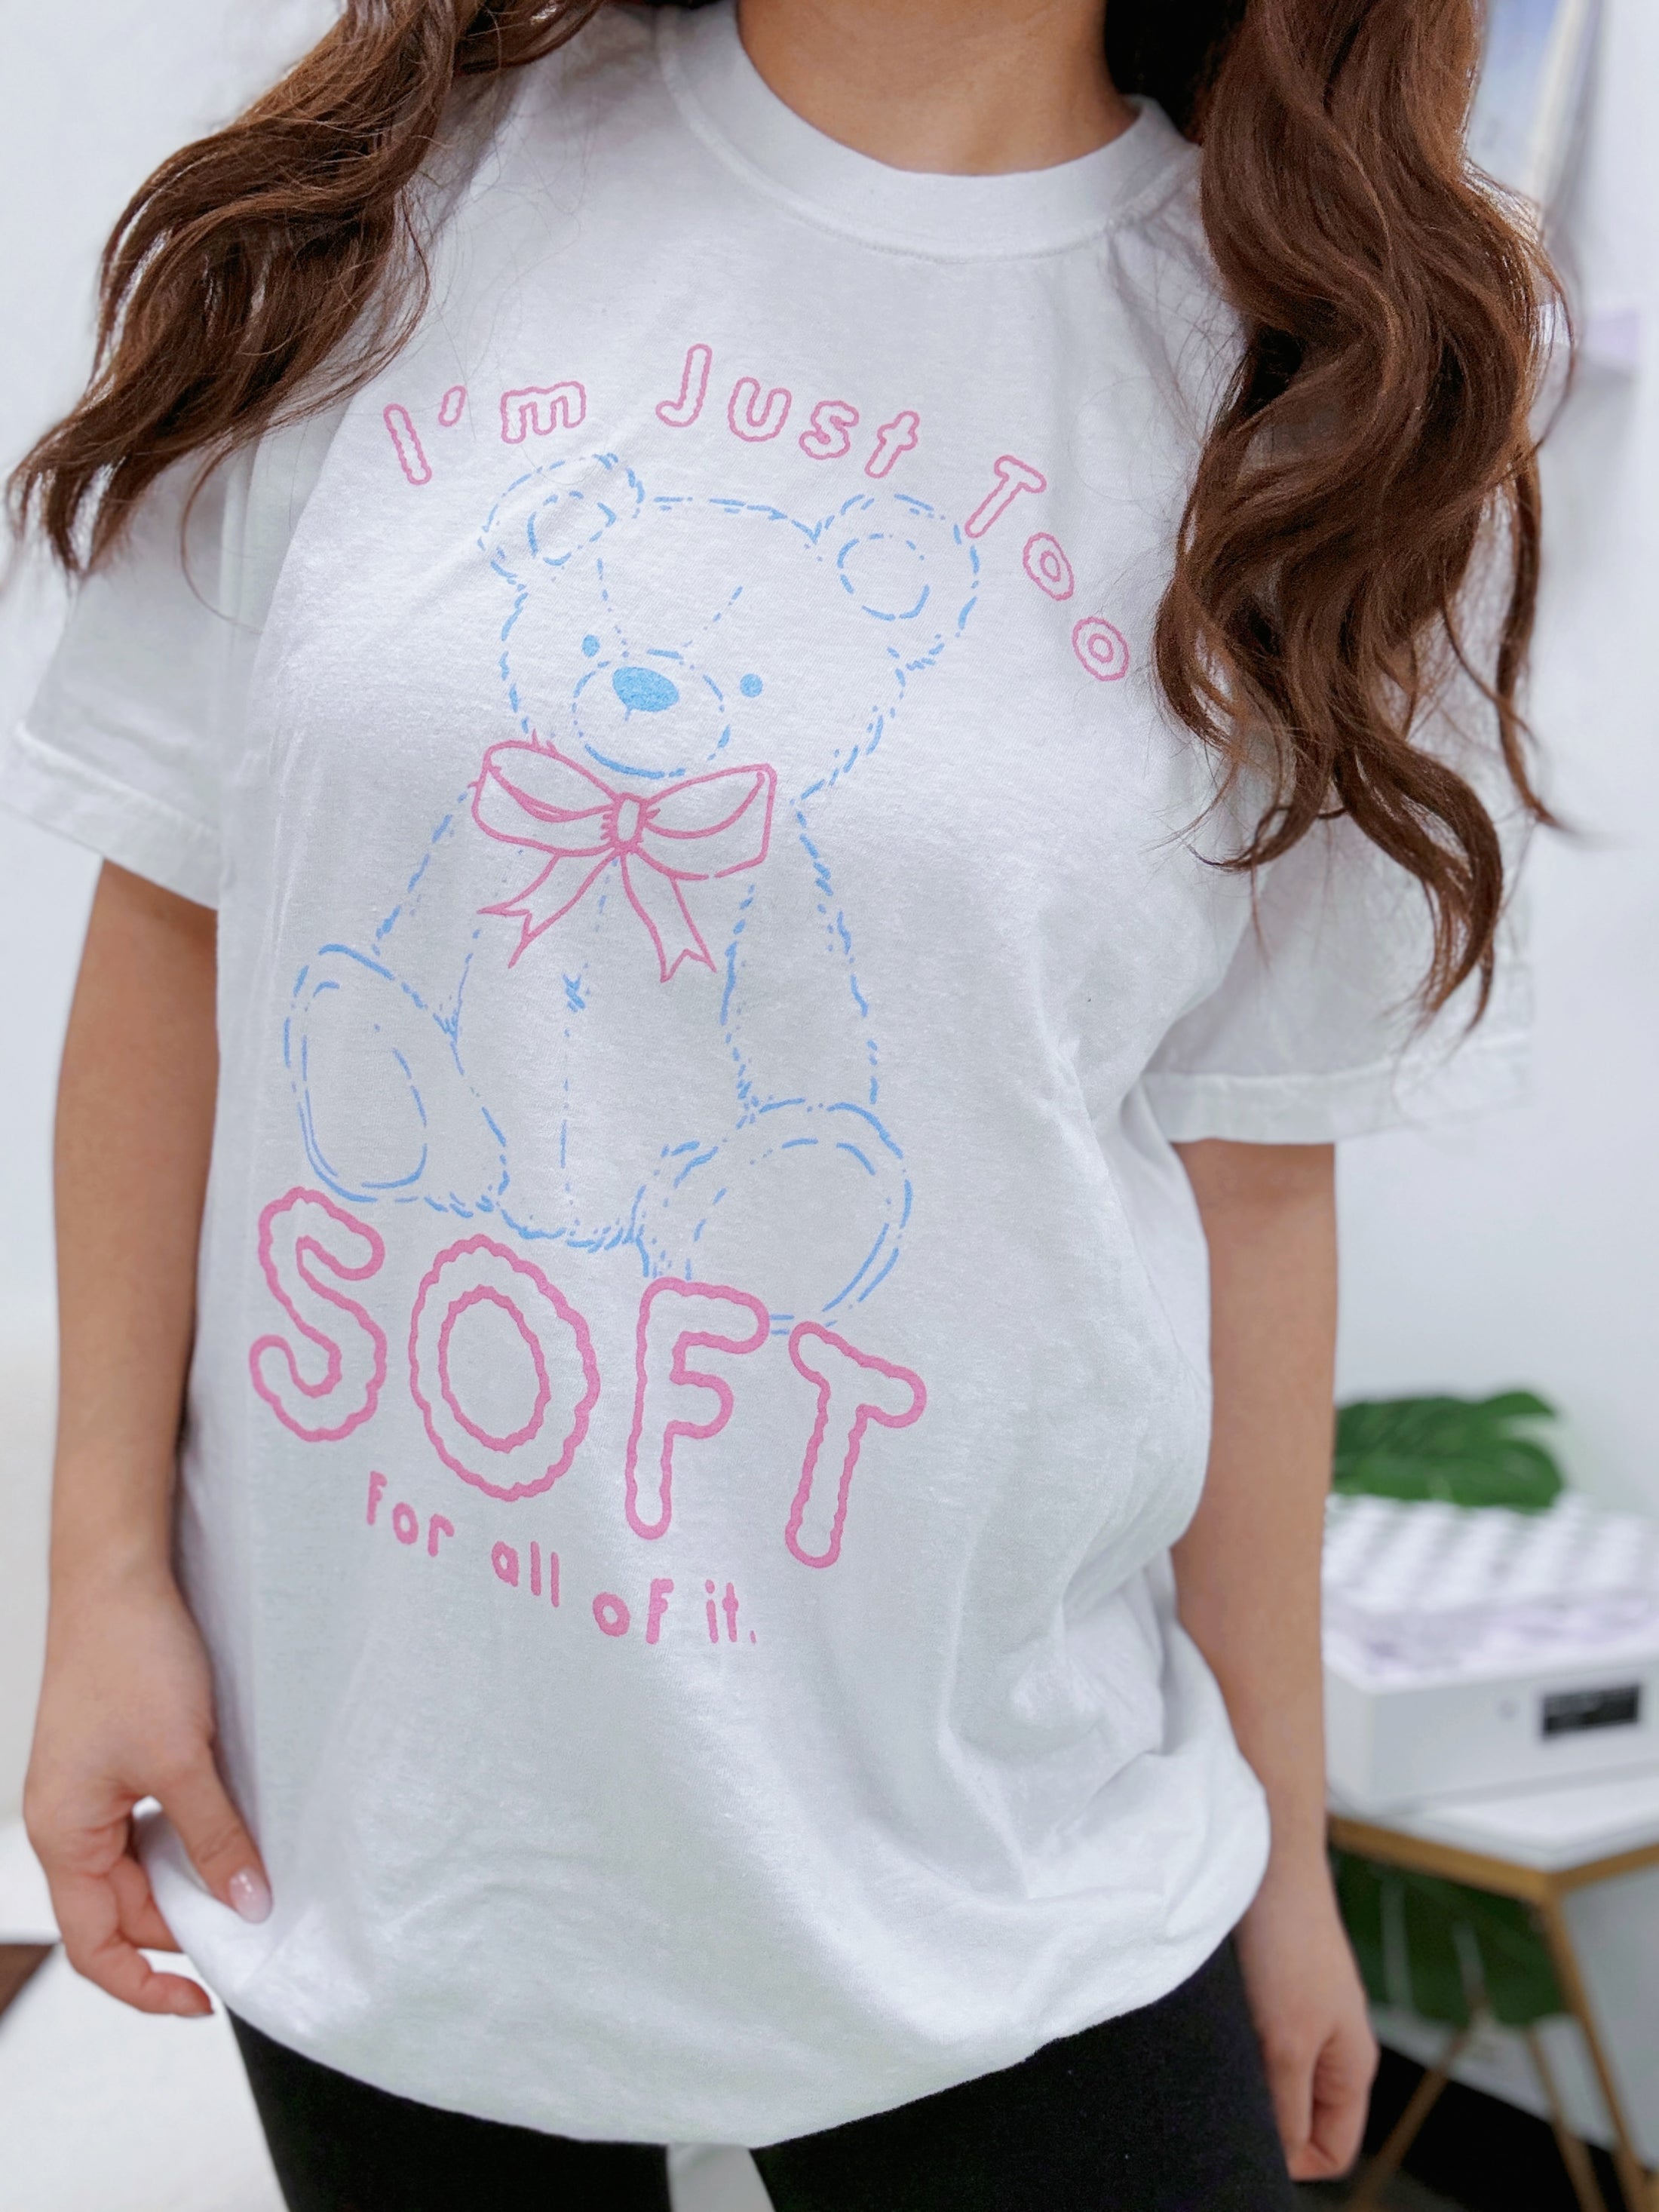 I'm just too Soft Garment Dyed Tee